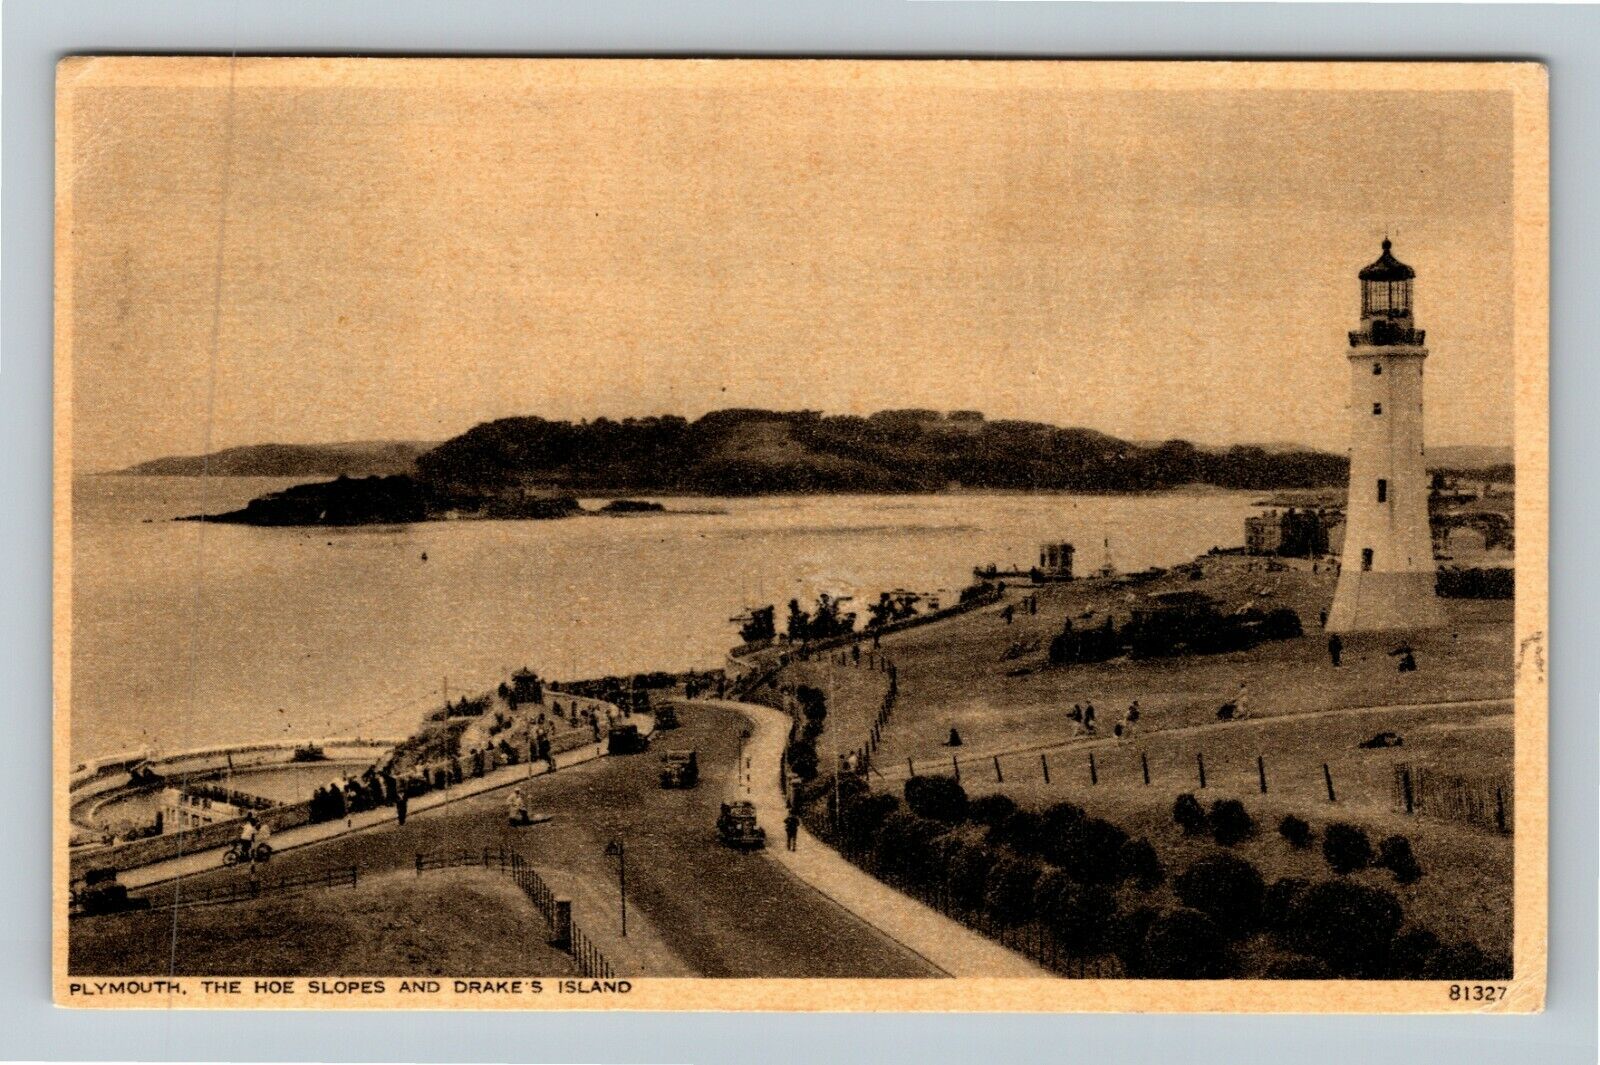 Plymouth The Hoe Slopes And Drake's Island United Kingdom c1956 Vintage Postcard